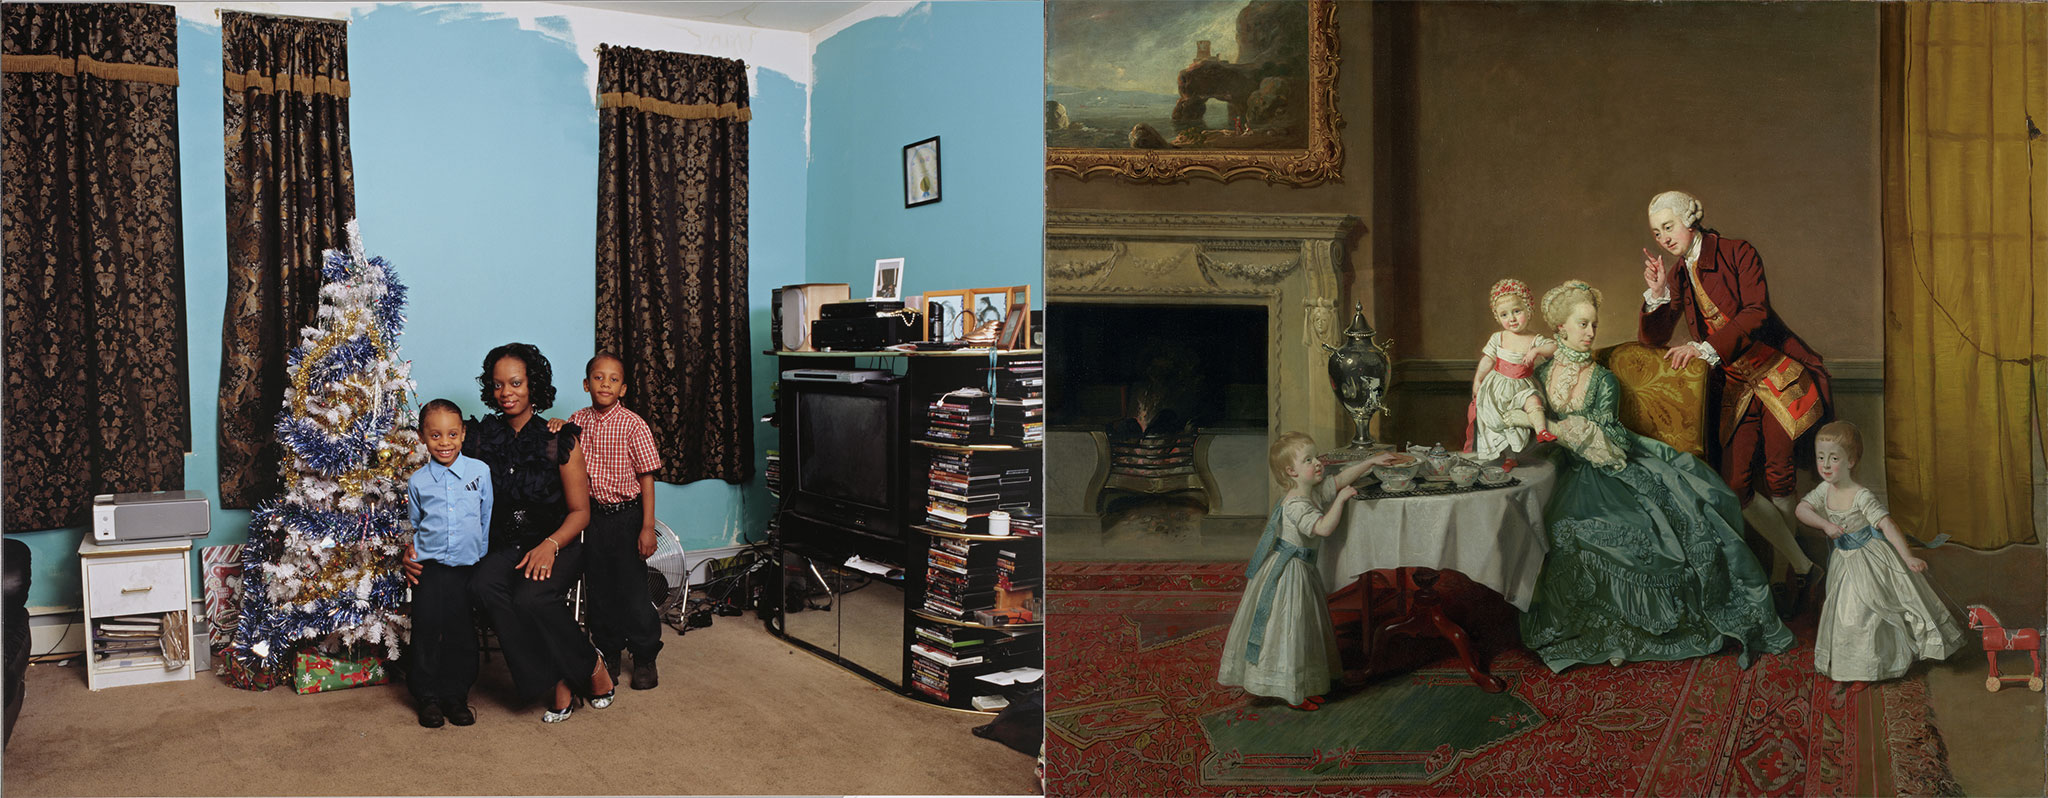 Coulson Family, 2008, Deana Lawson. Pigment print, 33 1/8 × 43 1/8 in. Getty Museum, Los Angeles, 2021.53.2. © Deana Lawson and John, Fourteenth Lord Willoughby de Broke, and His Family, about 1766, Johann Zoffany. Oil on canvas, 40 1/8 × 50 1/8 in. Getty Museum, 96.PA.312